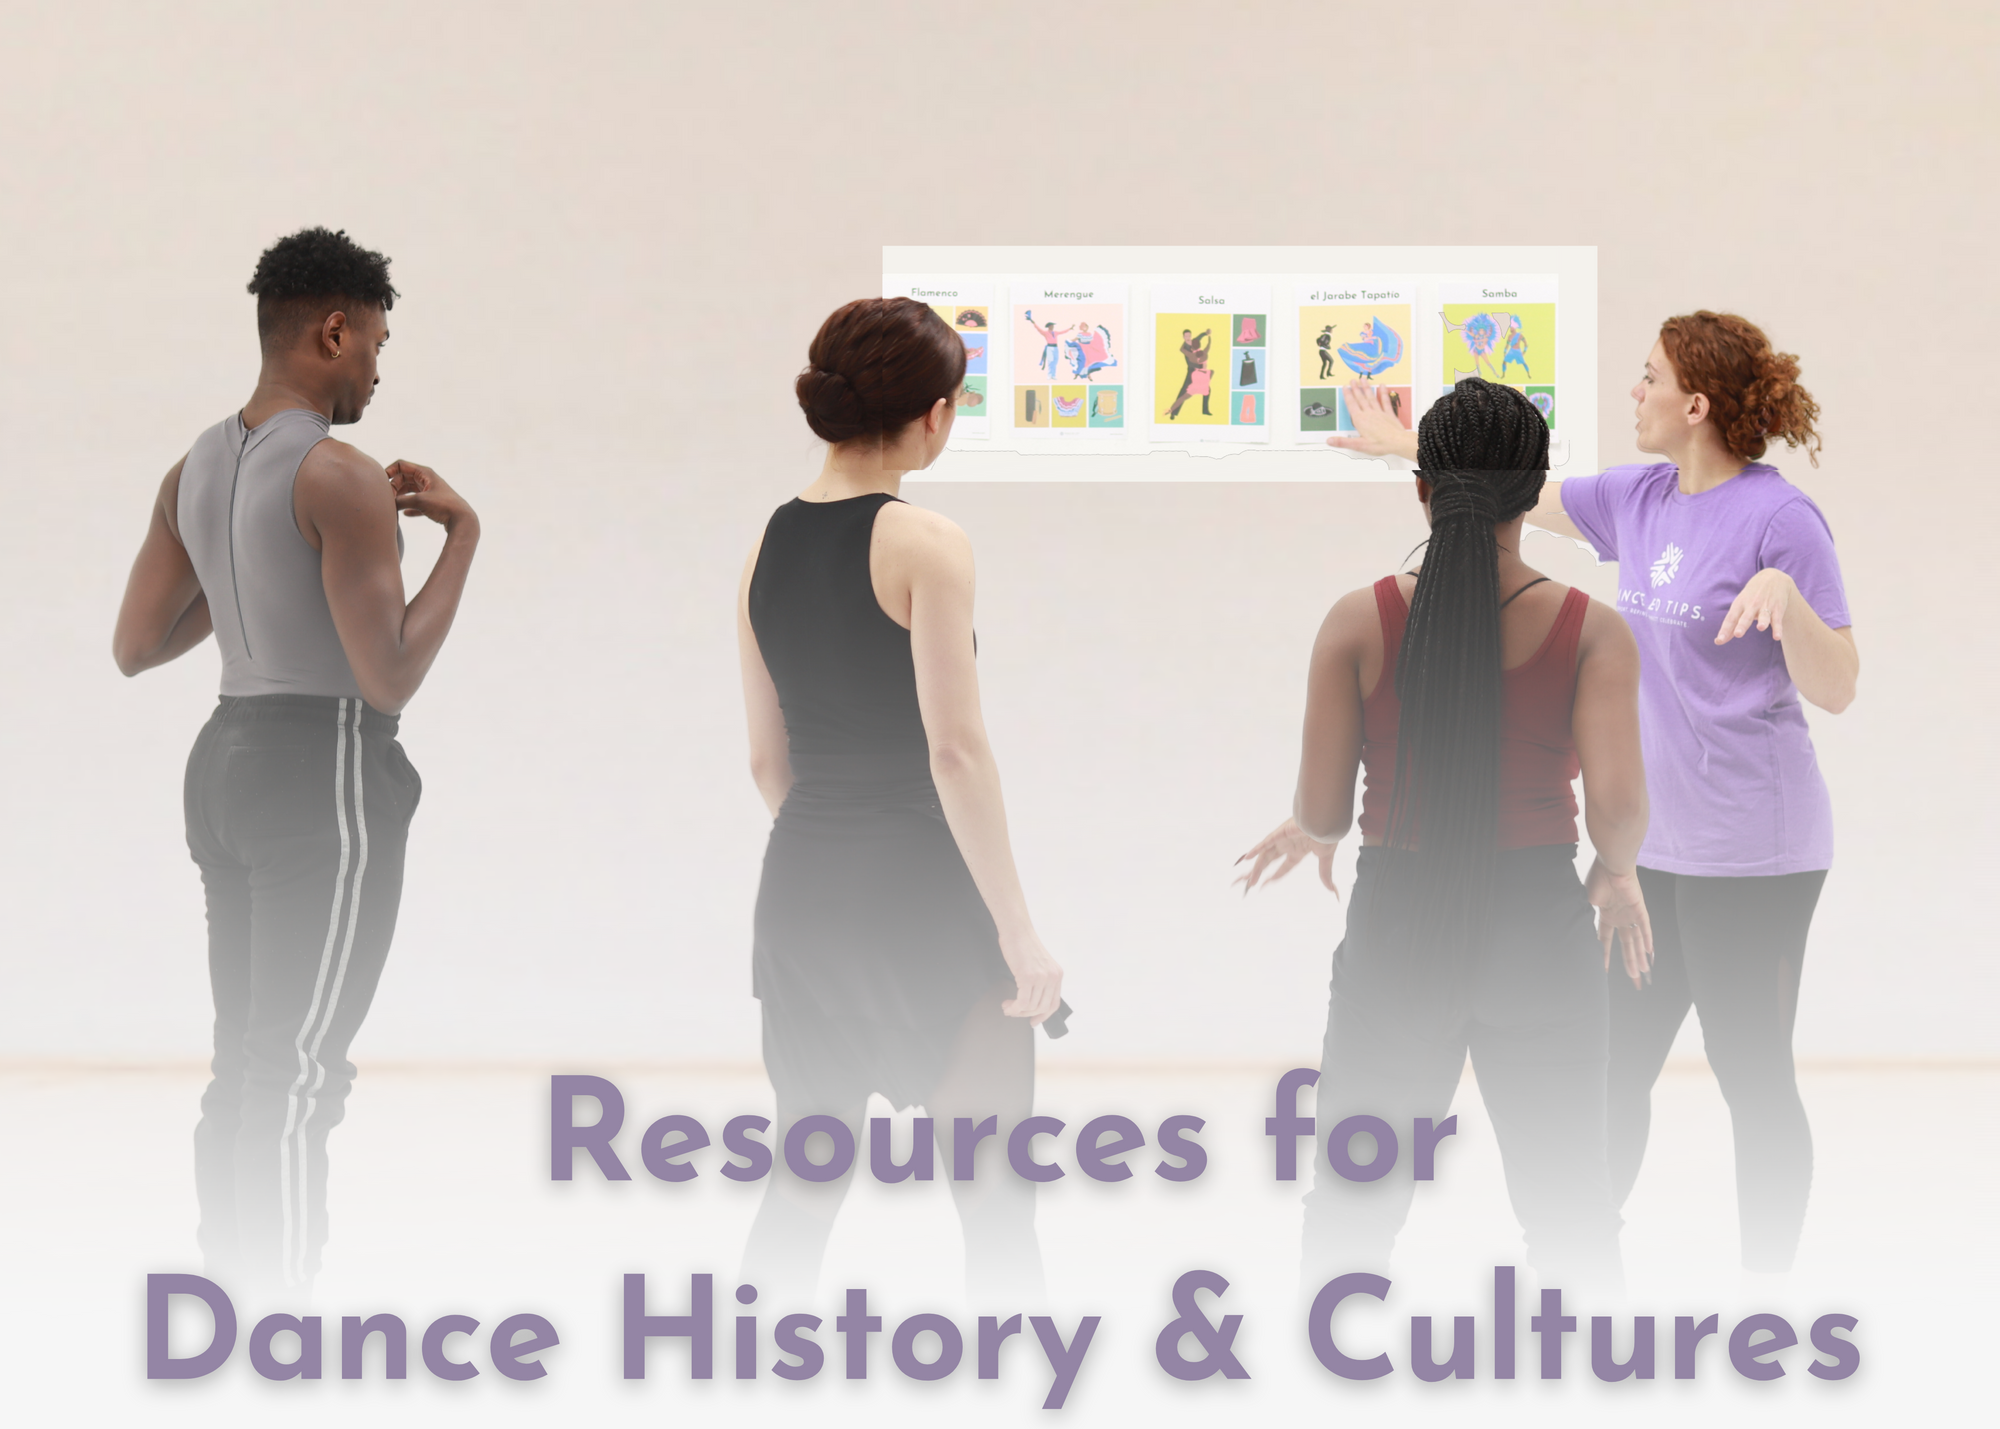 Resources for Dance History & Cultures